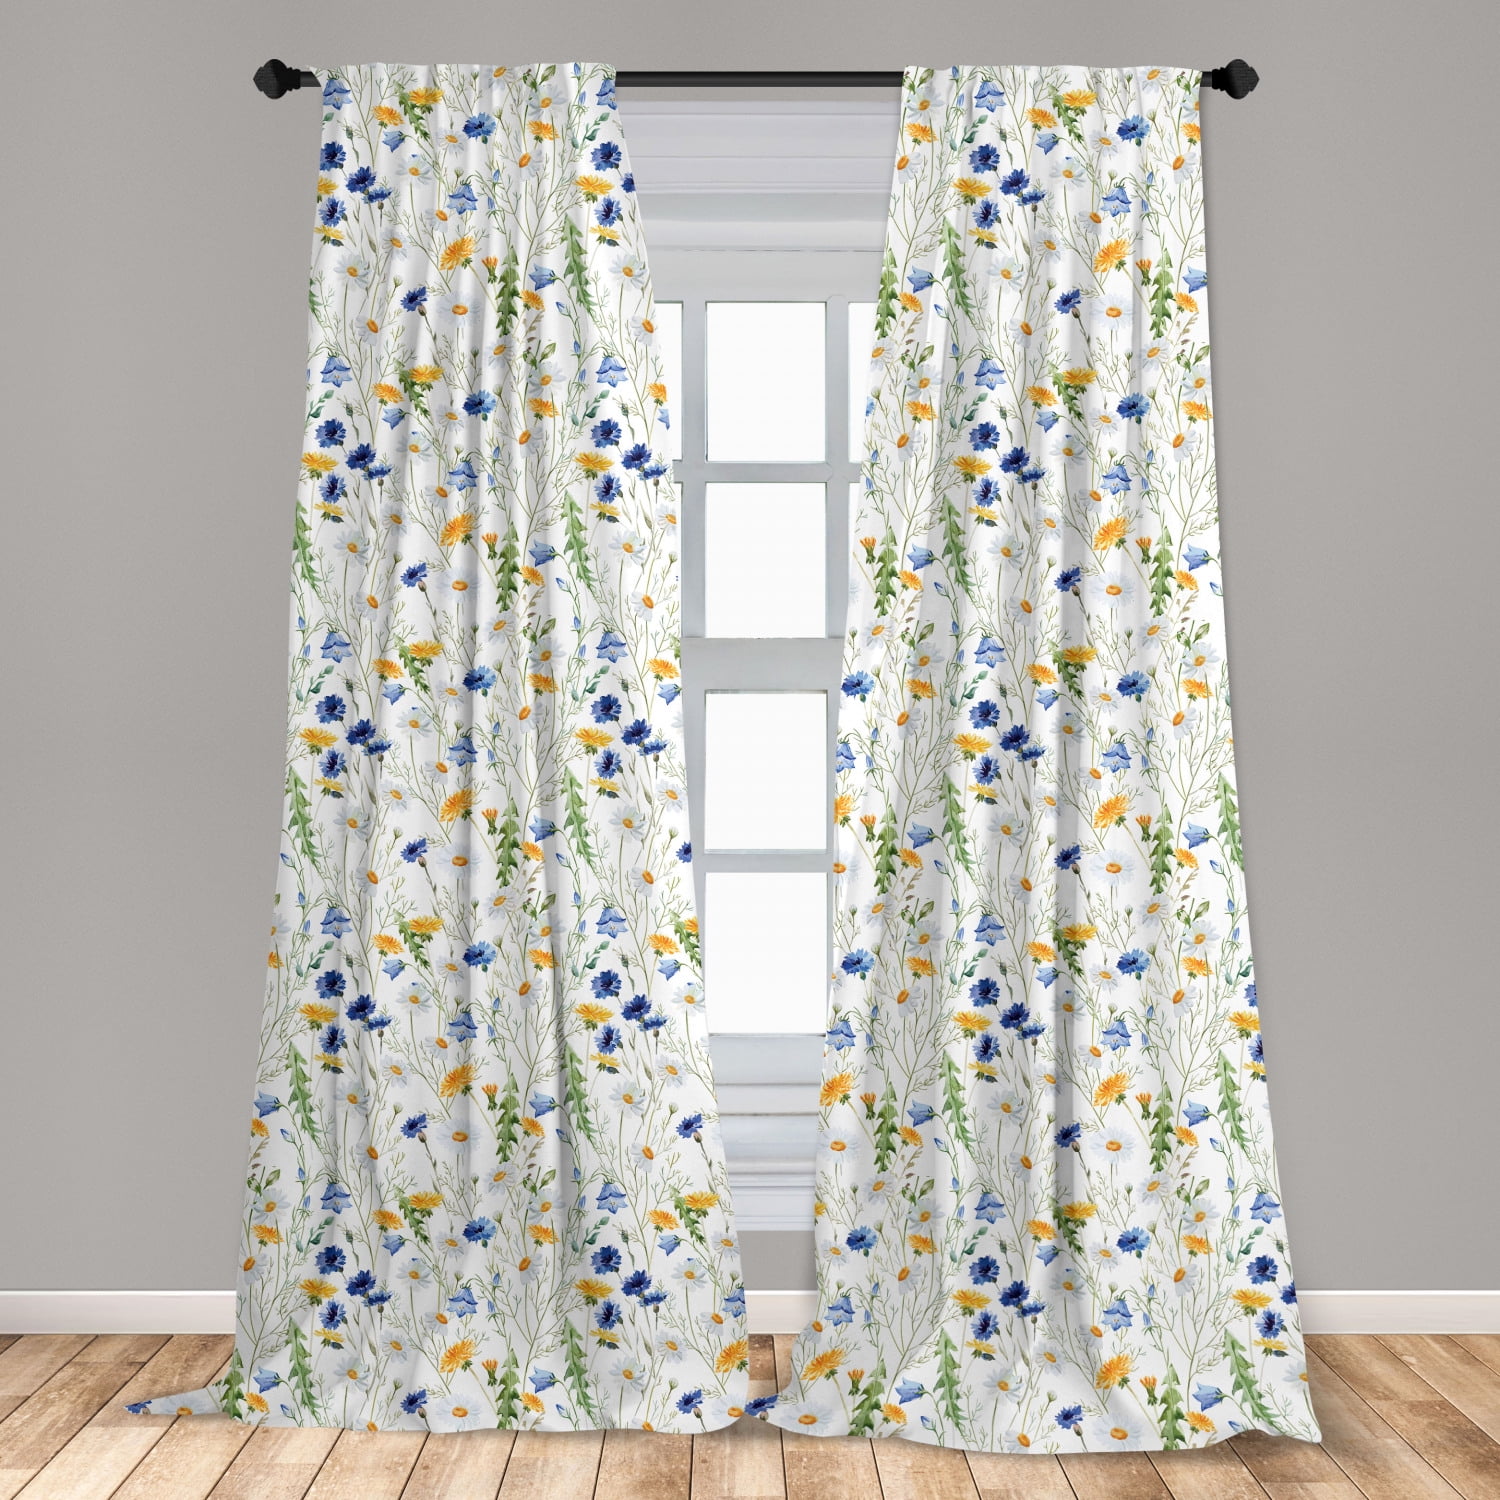 Heavy Duty Fully Lined Panama Eyelet Pair Curtains With Tie Backs Floral Poppy 